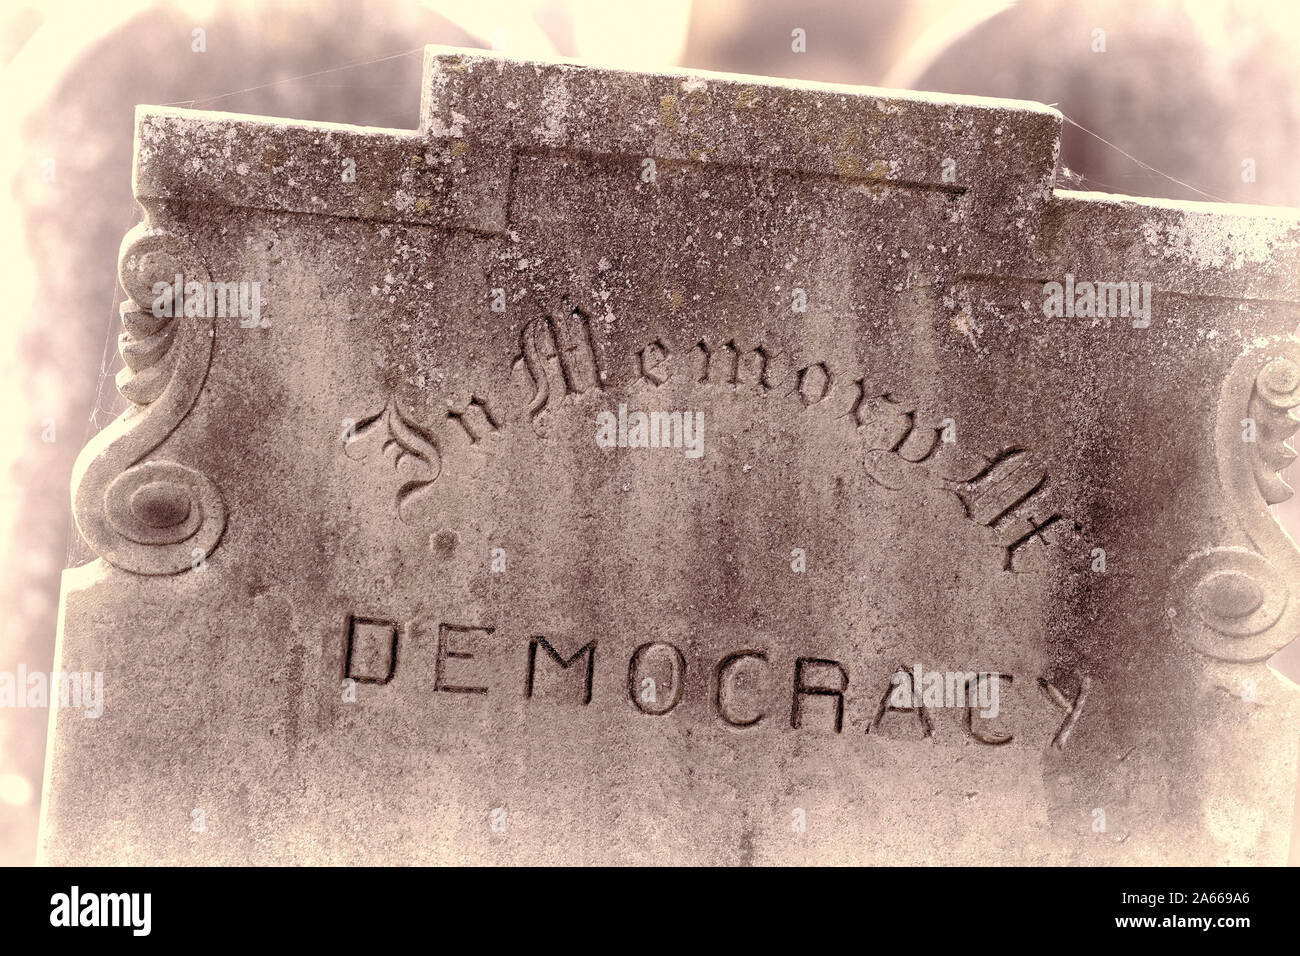 In Memory of democracy. Brexit referendum and election concept image. Gravestone with the word democracy. Political madness and modern politics gone b Stock Photo